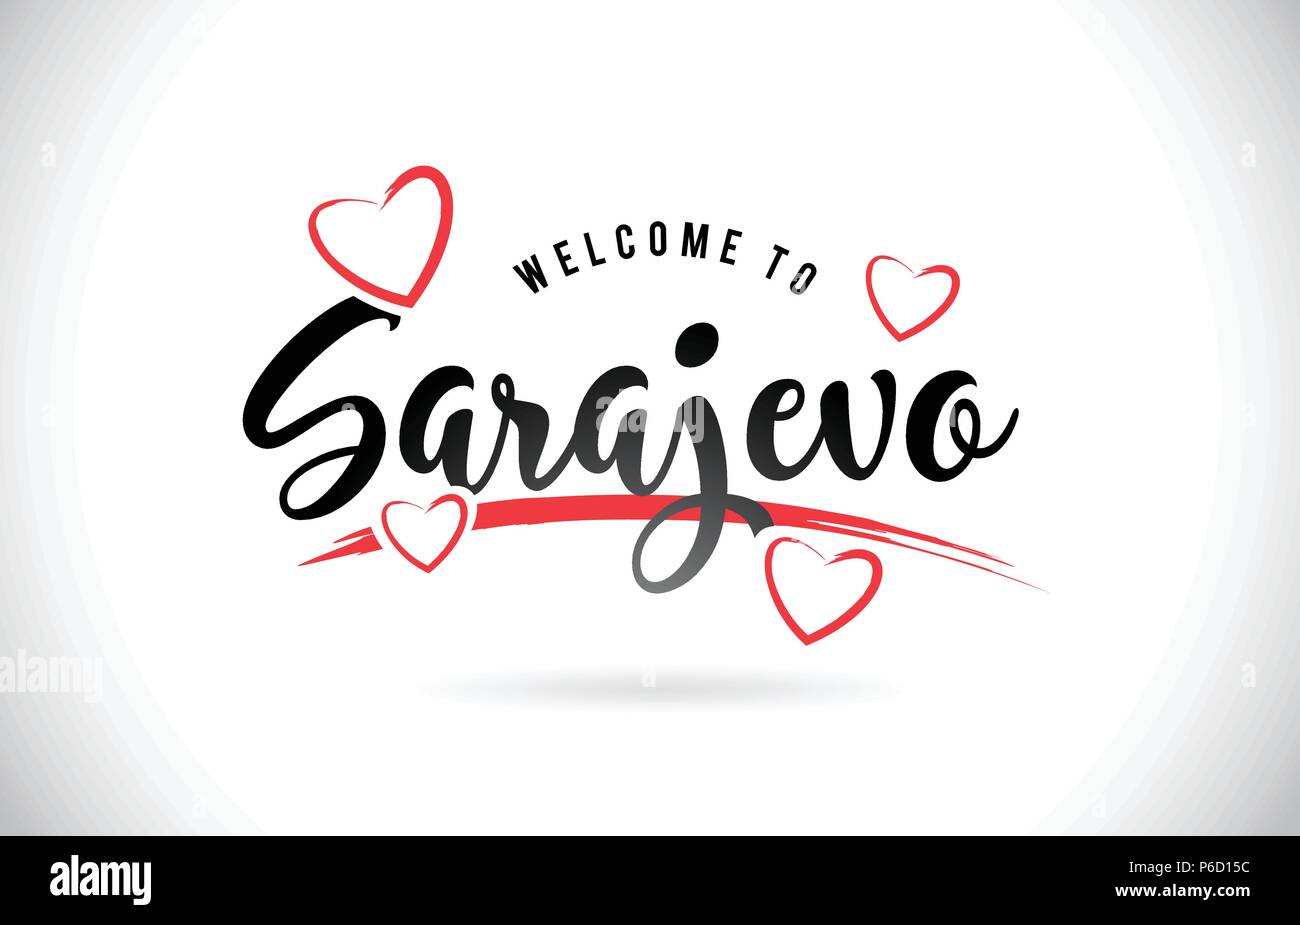 Sarajevo Welcome To Word Text with Handwritten Font and Red Love Hearts Vector Image Illustration Eps. Stock Vector